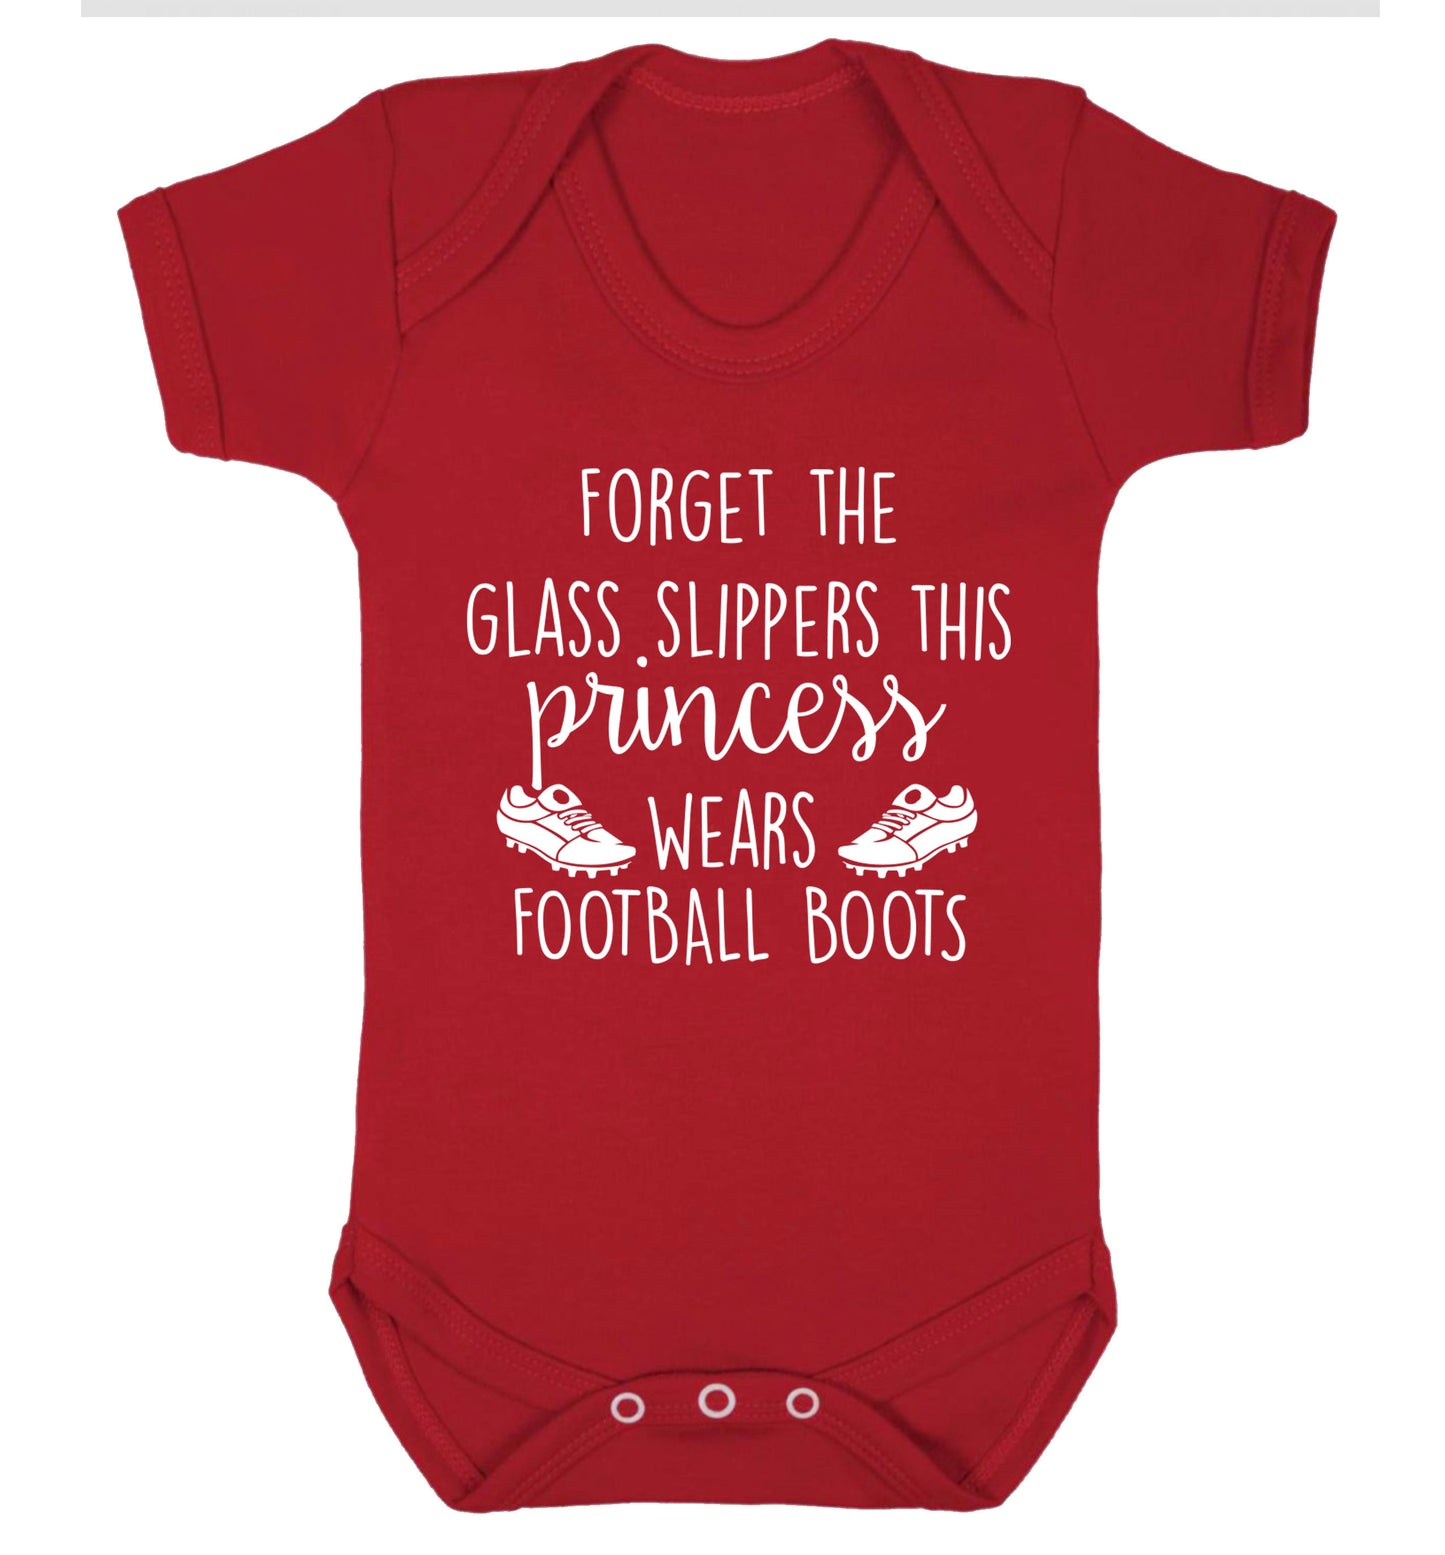 Forget the glass slippers this princess wears football boots Baby Vest red 18-24 months